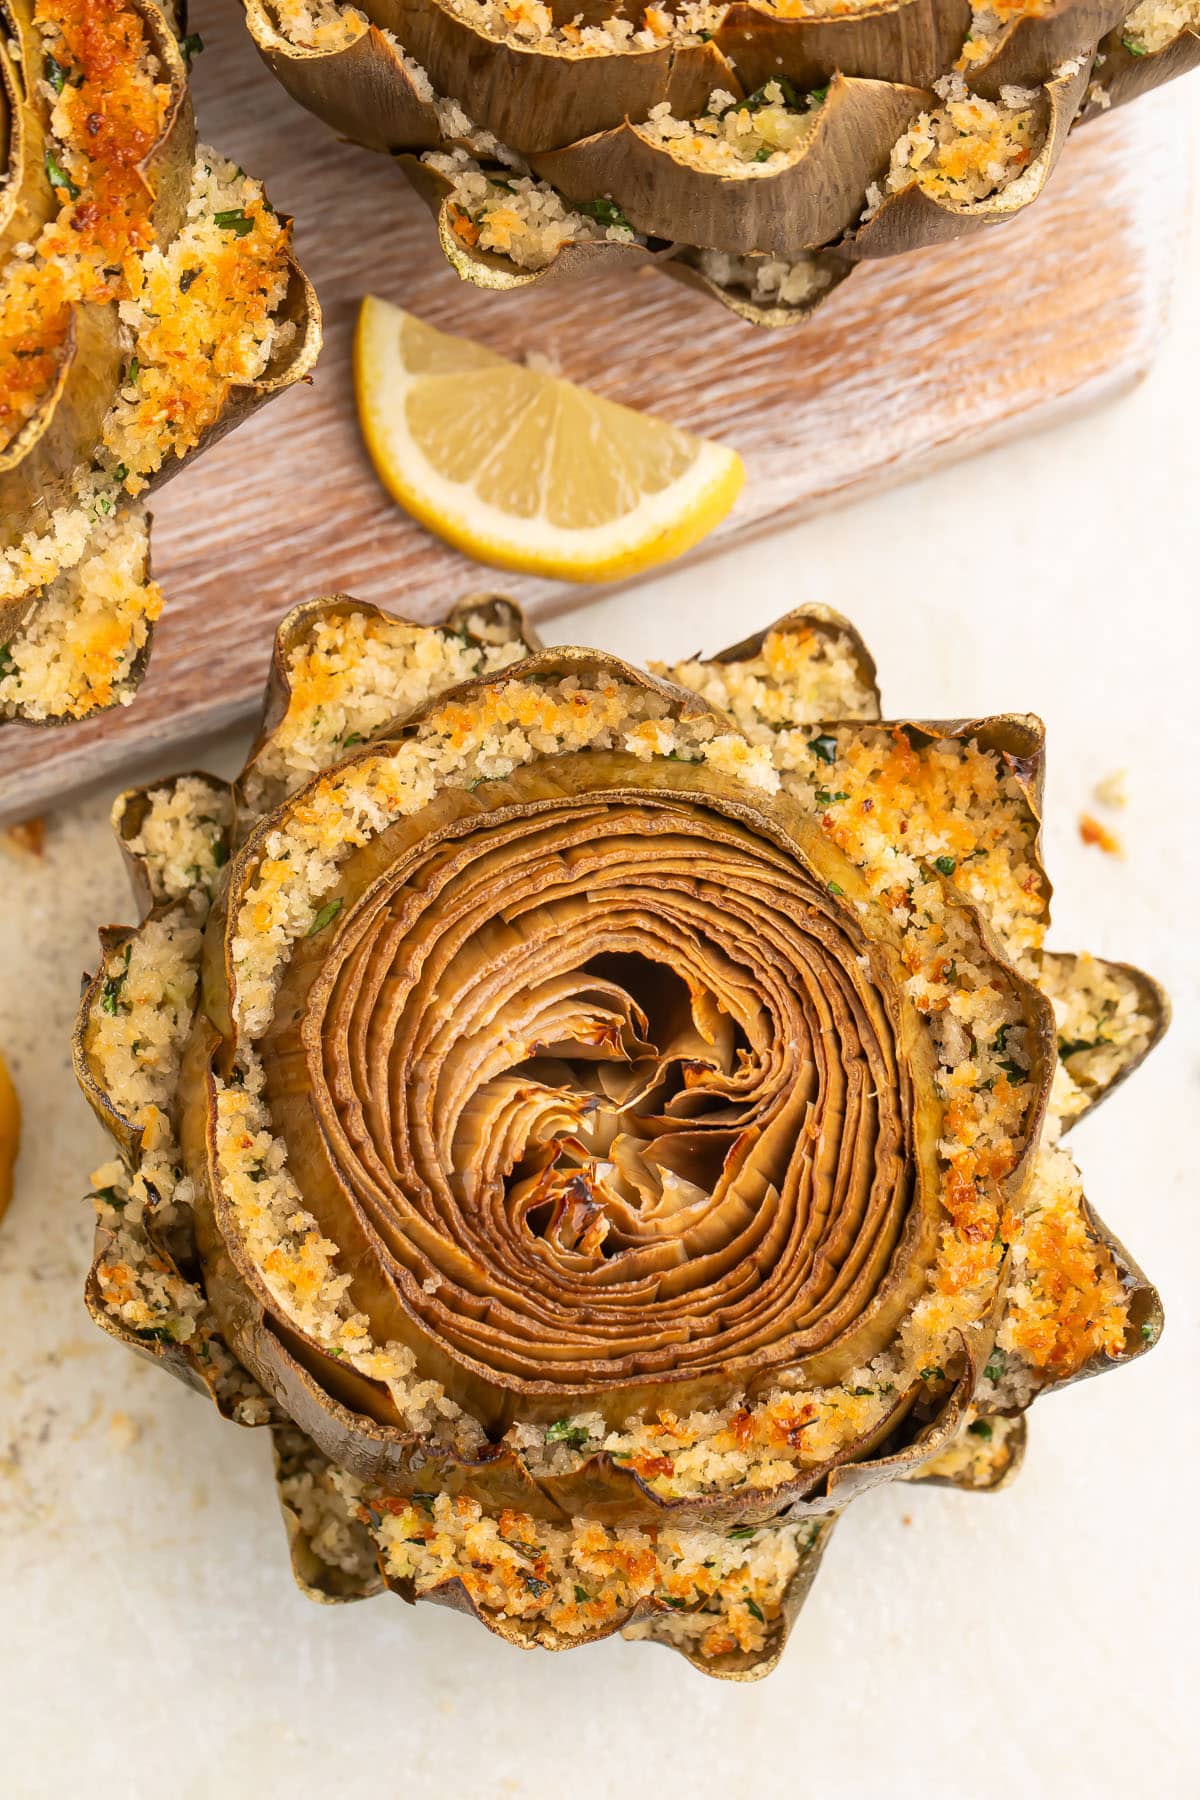 Top-down look at a stuffed artichoke, with breadcrumb stuffing packed between each row of petals and baked until golden.